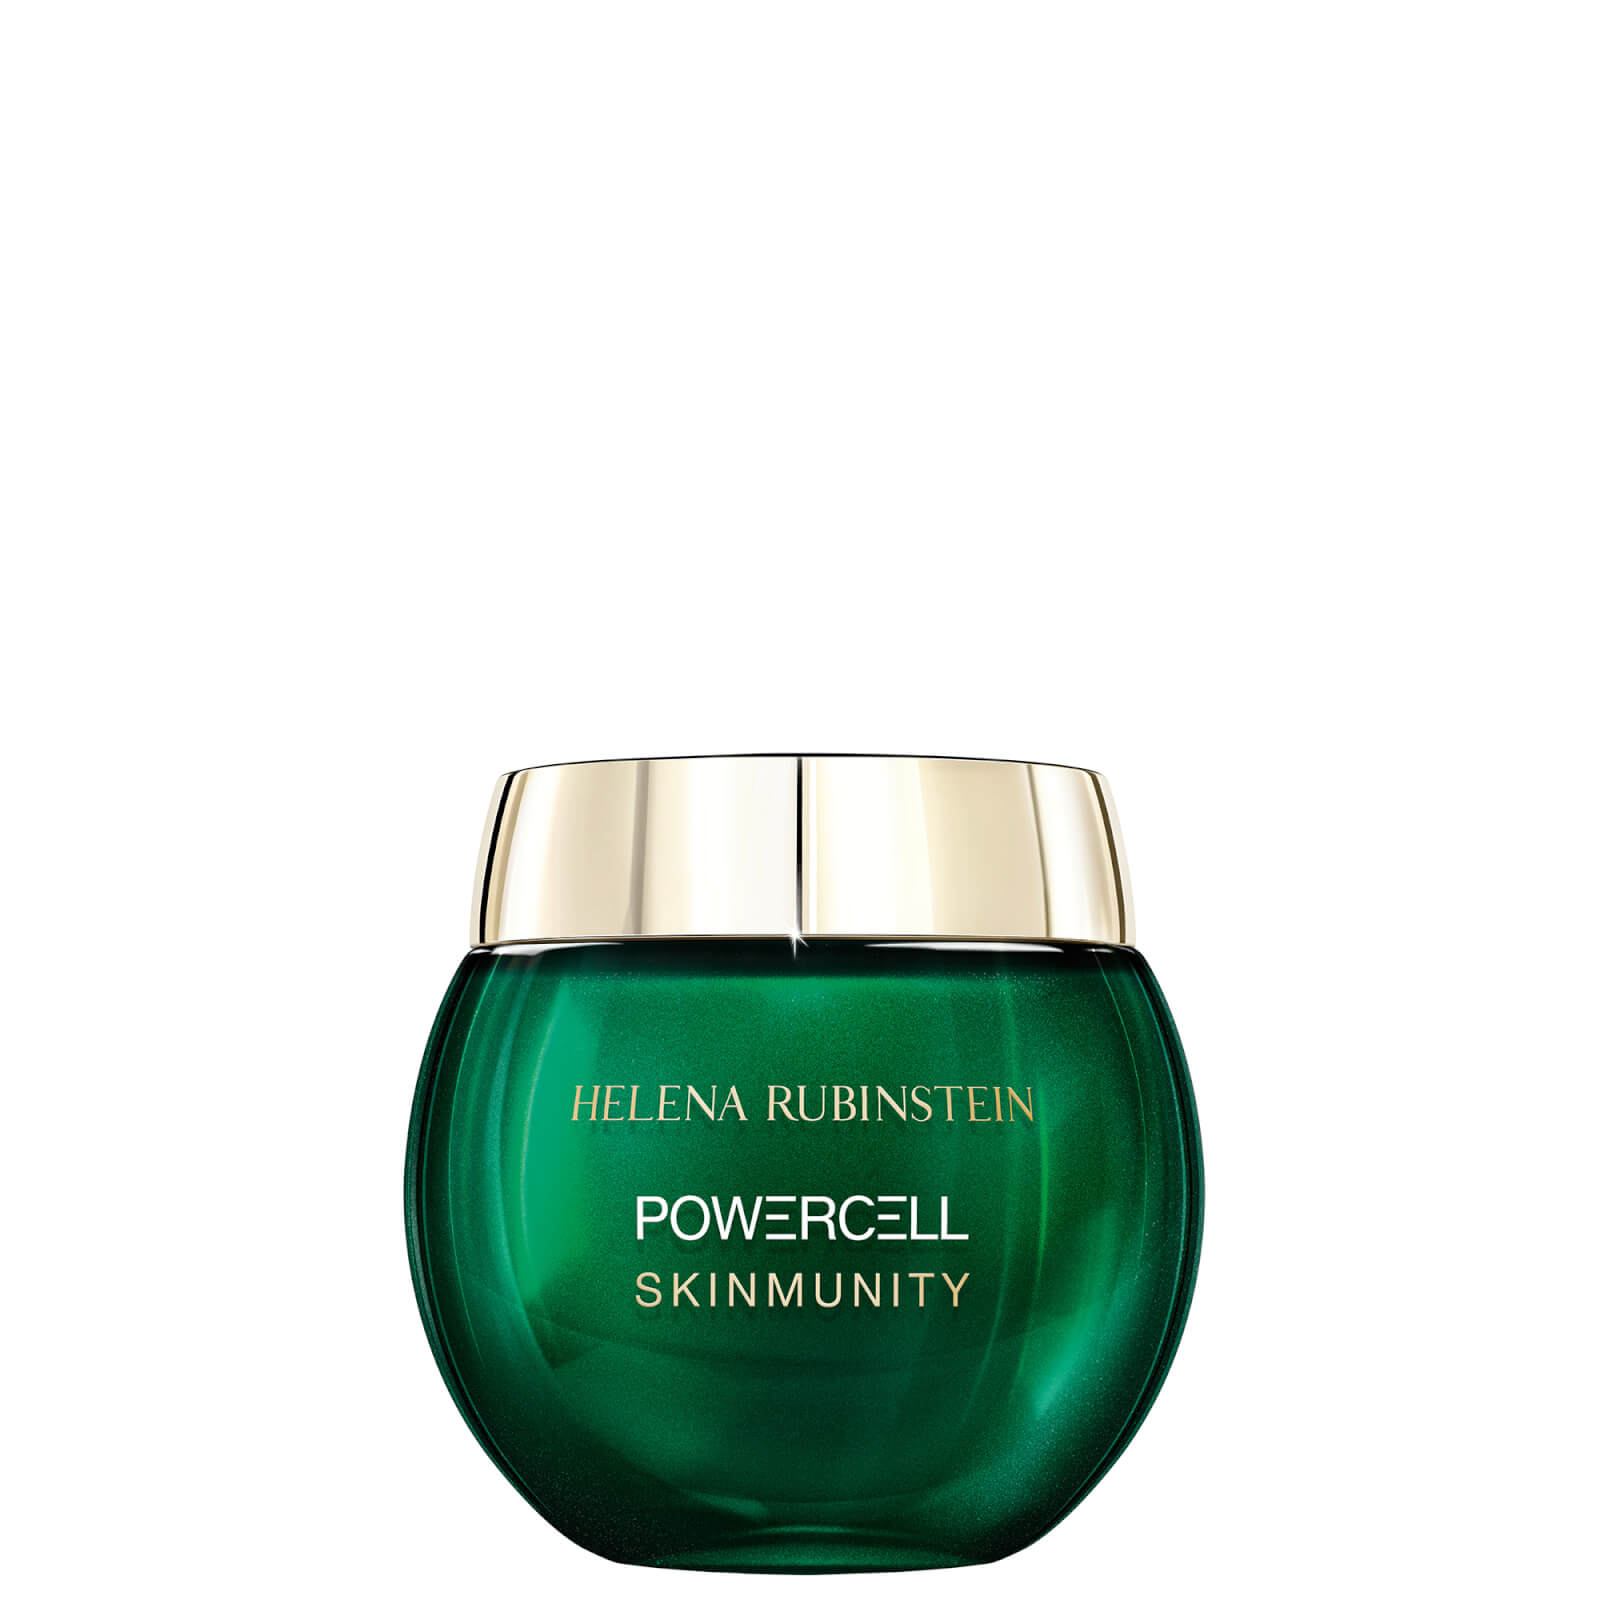 Photos - Cream / Lotion Helena Rubinstein Powercell Night Reload The Replumping Cream 50ml L773880 